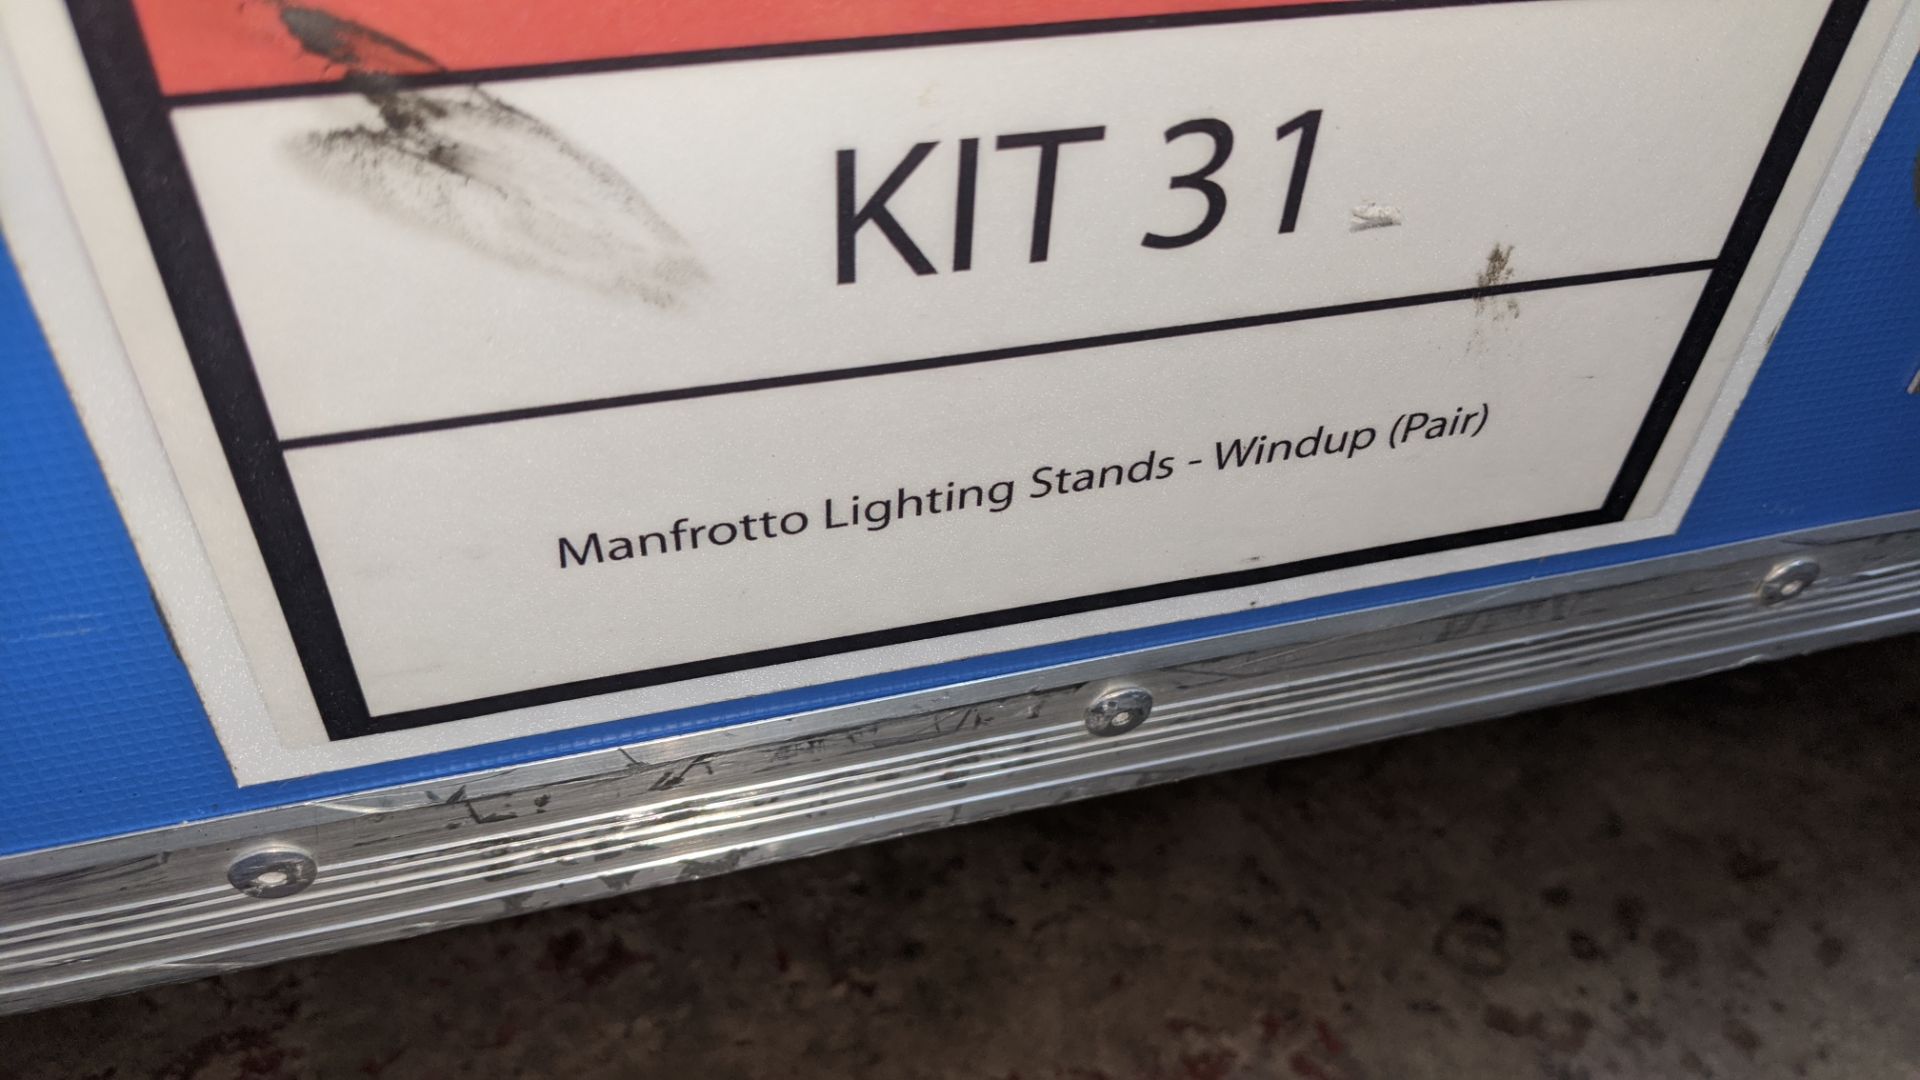 Manfrotto lighting stand kit comprising wind up pair & mobile flight case Lots 51 - 480 comprise the - Image 3 of 5